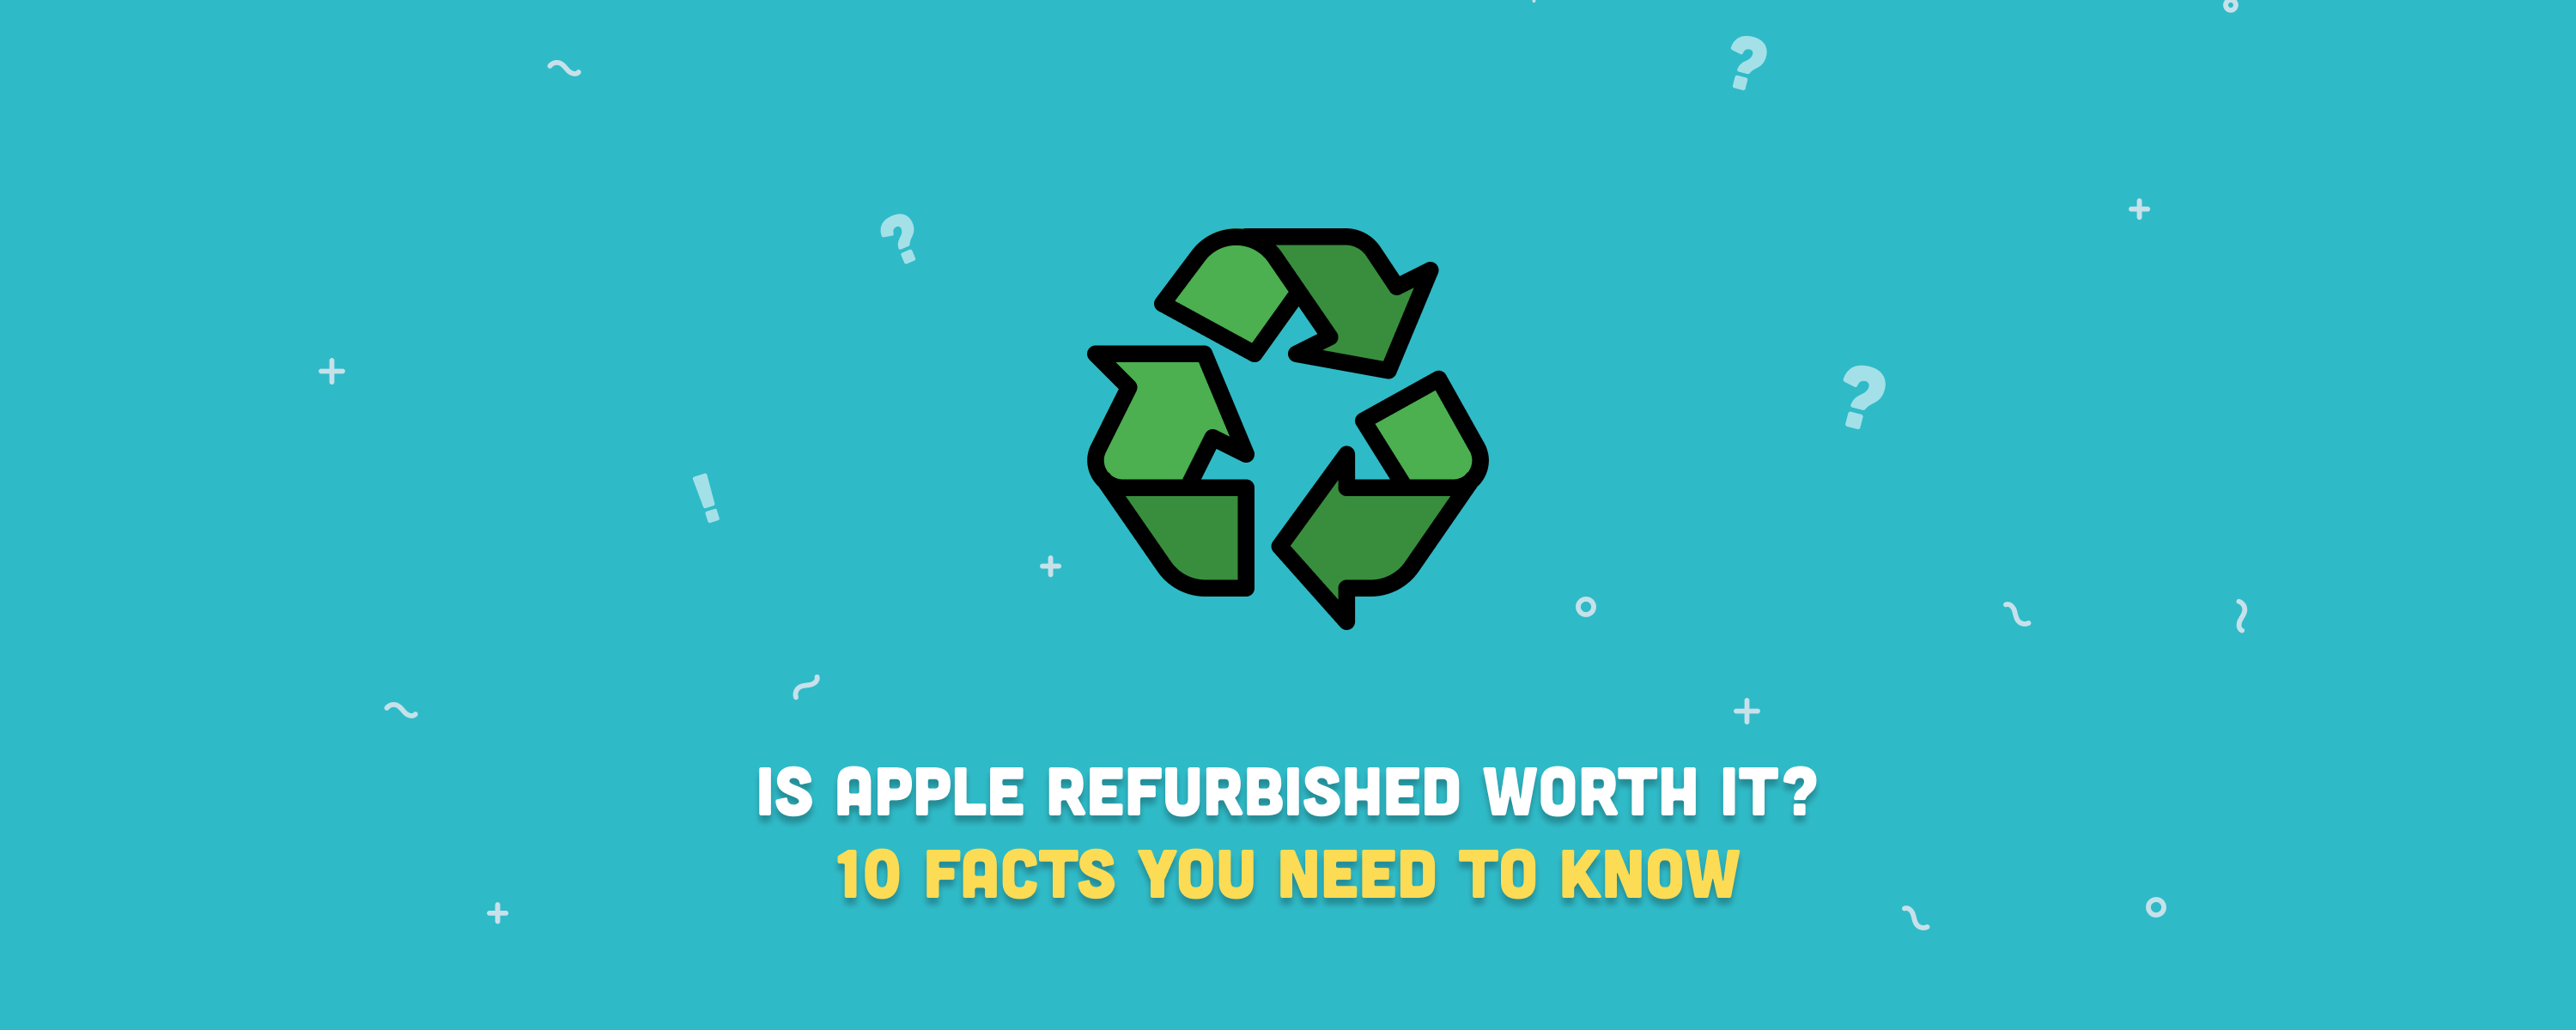 10 Facts to Know If Apple Refurbished Is Worth It